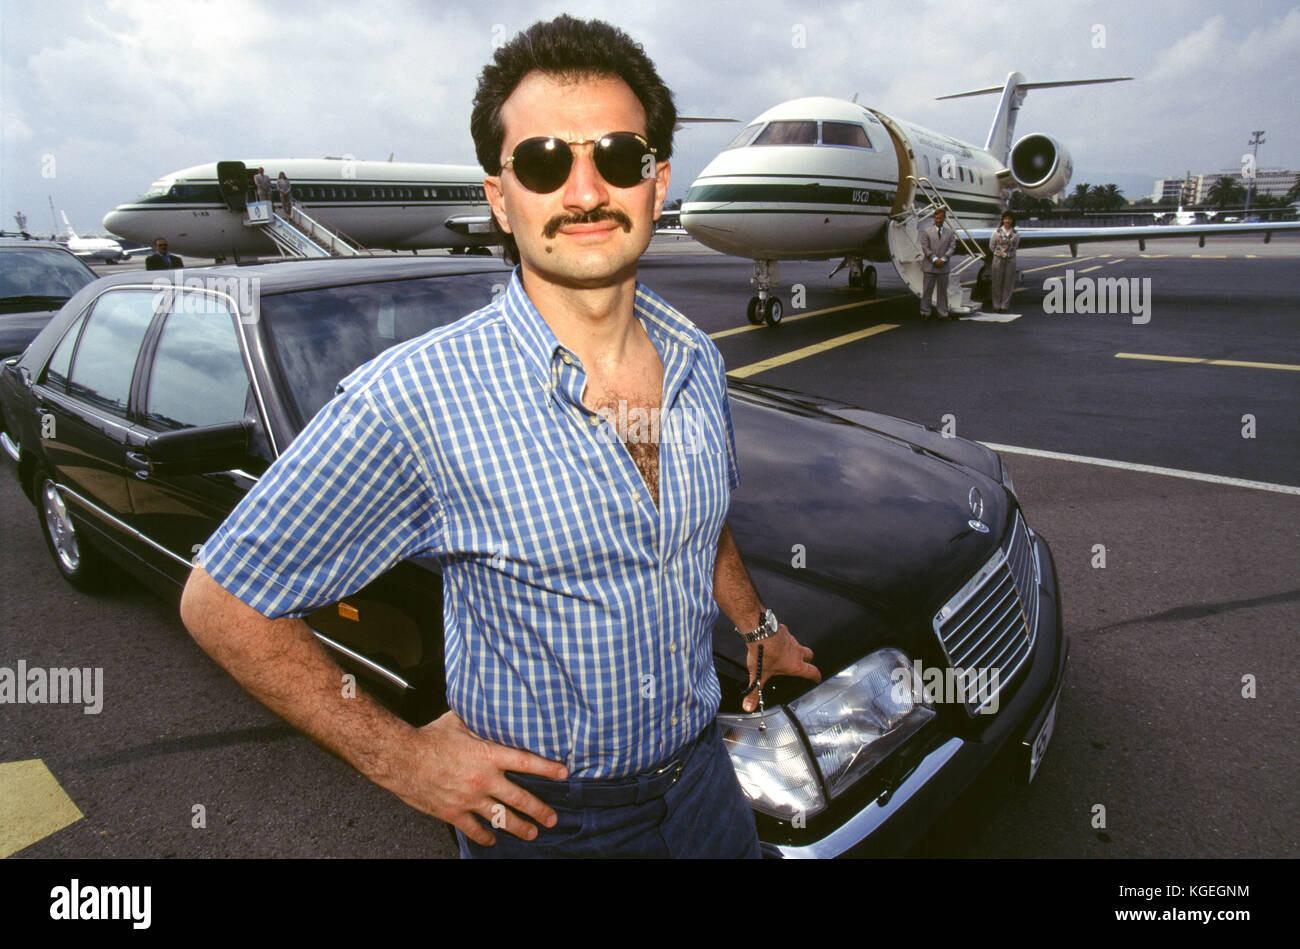 Saudi prince Al-Waleed Bin Talal bin Abdulaziz al Saud, businessman, investor and philanthropist, and member of the Saudi royal family, with his private jets and helicopter at Nice Airport where he summers with his children.  They stay on board his 'Kingdom 5KR', an 85-meter yacht, bought 'Trump Princess' from Donald Trump in the 1980s during his financial problems, who had in turn bought 'Nabila'  from Saudi arms dealer Khashoggi, during which time it appeared as the Flying Saucer in James Bond's 'Never Say Never Again', in Nice, France in 1997.  Al-Waleed was detained November 4th, 2017 in a Stock Photo